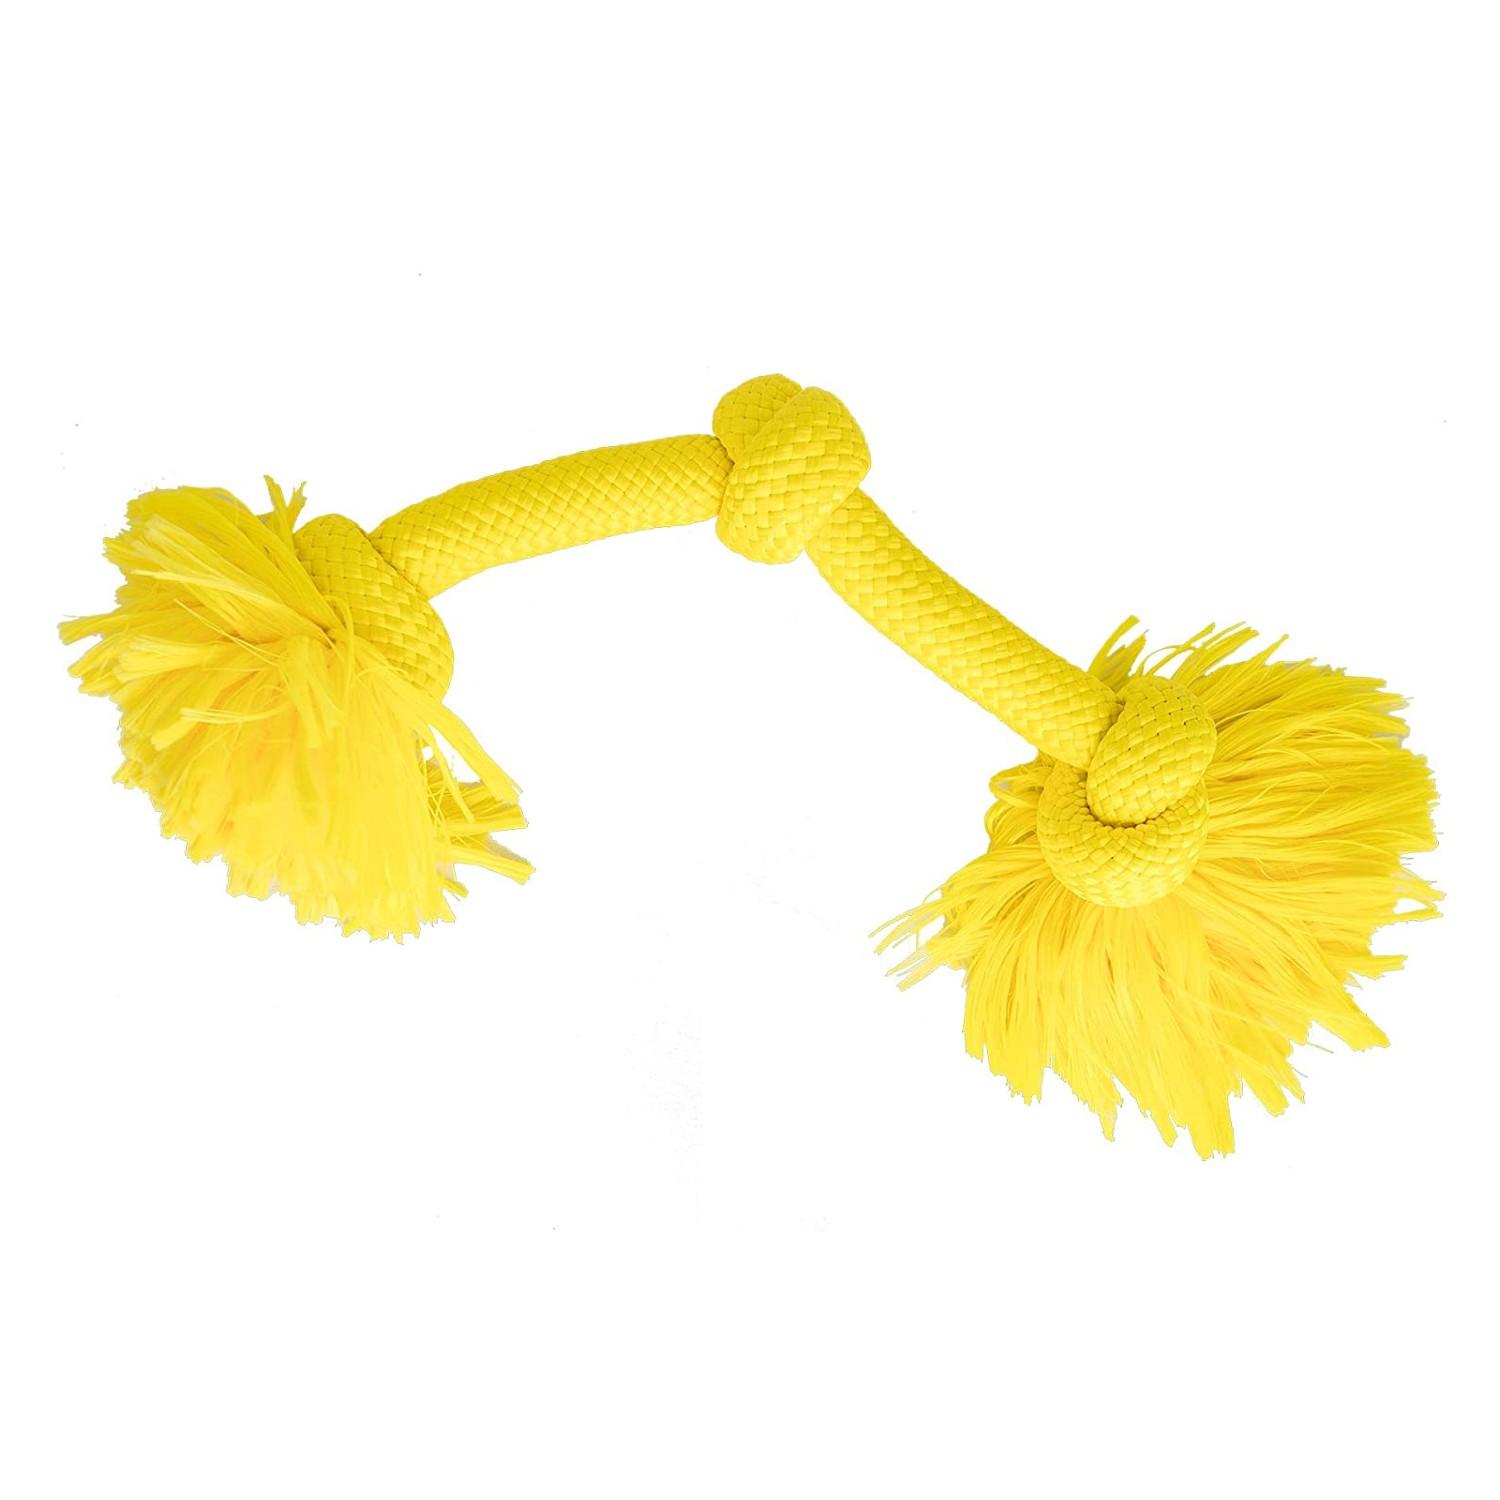 https://images.baxterboo.com/global/images/products/large/playology-all-natural-scented-dri-tech-rope-dog-toy-chicken-6531.jpg